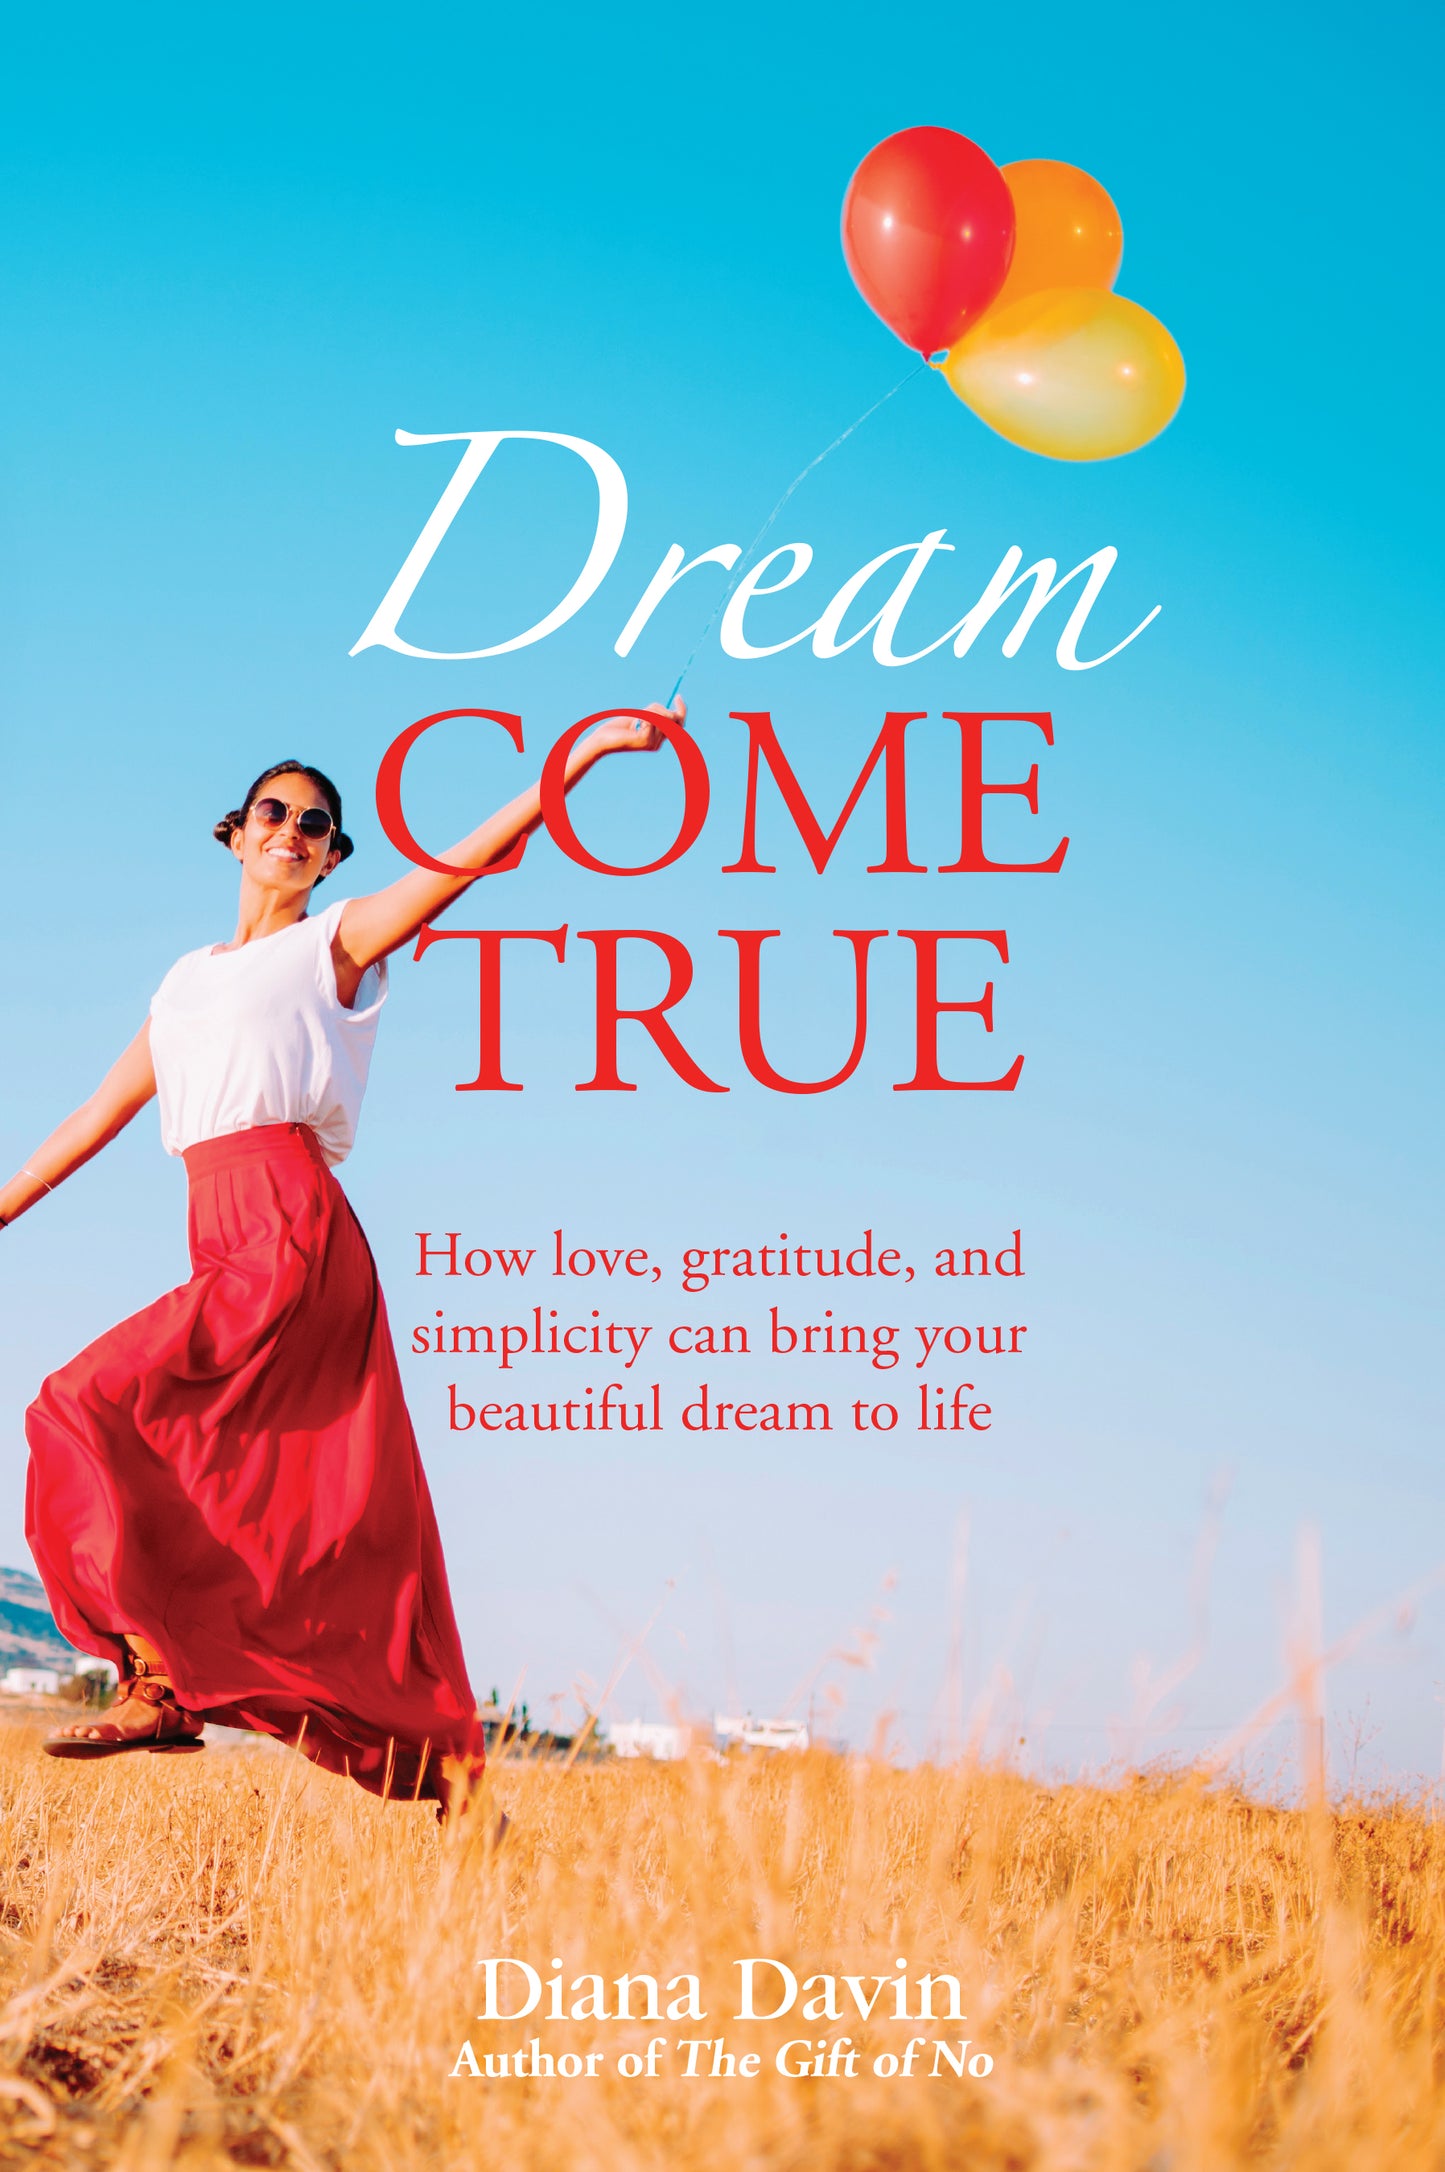 Dream Come True: How love, gratitude, and simplicity can bring your beautiful dream to life